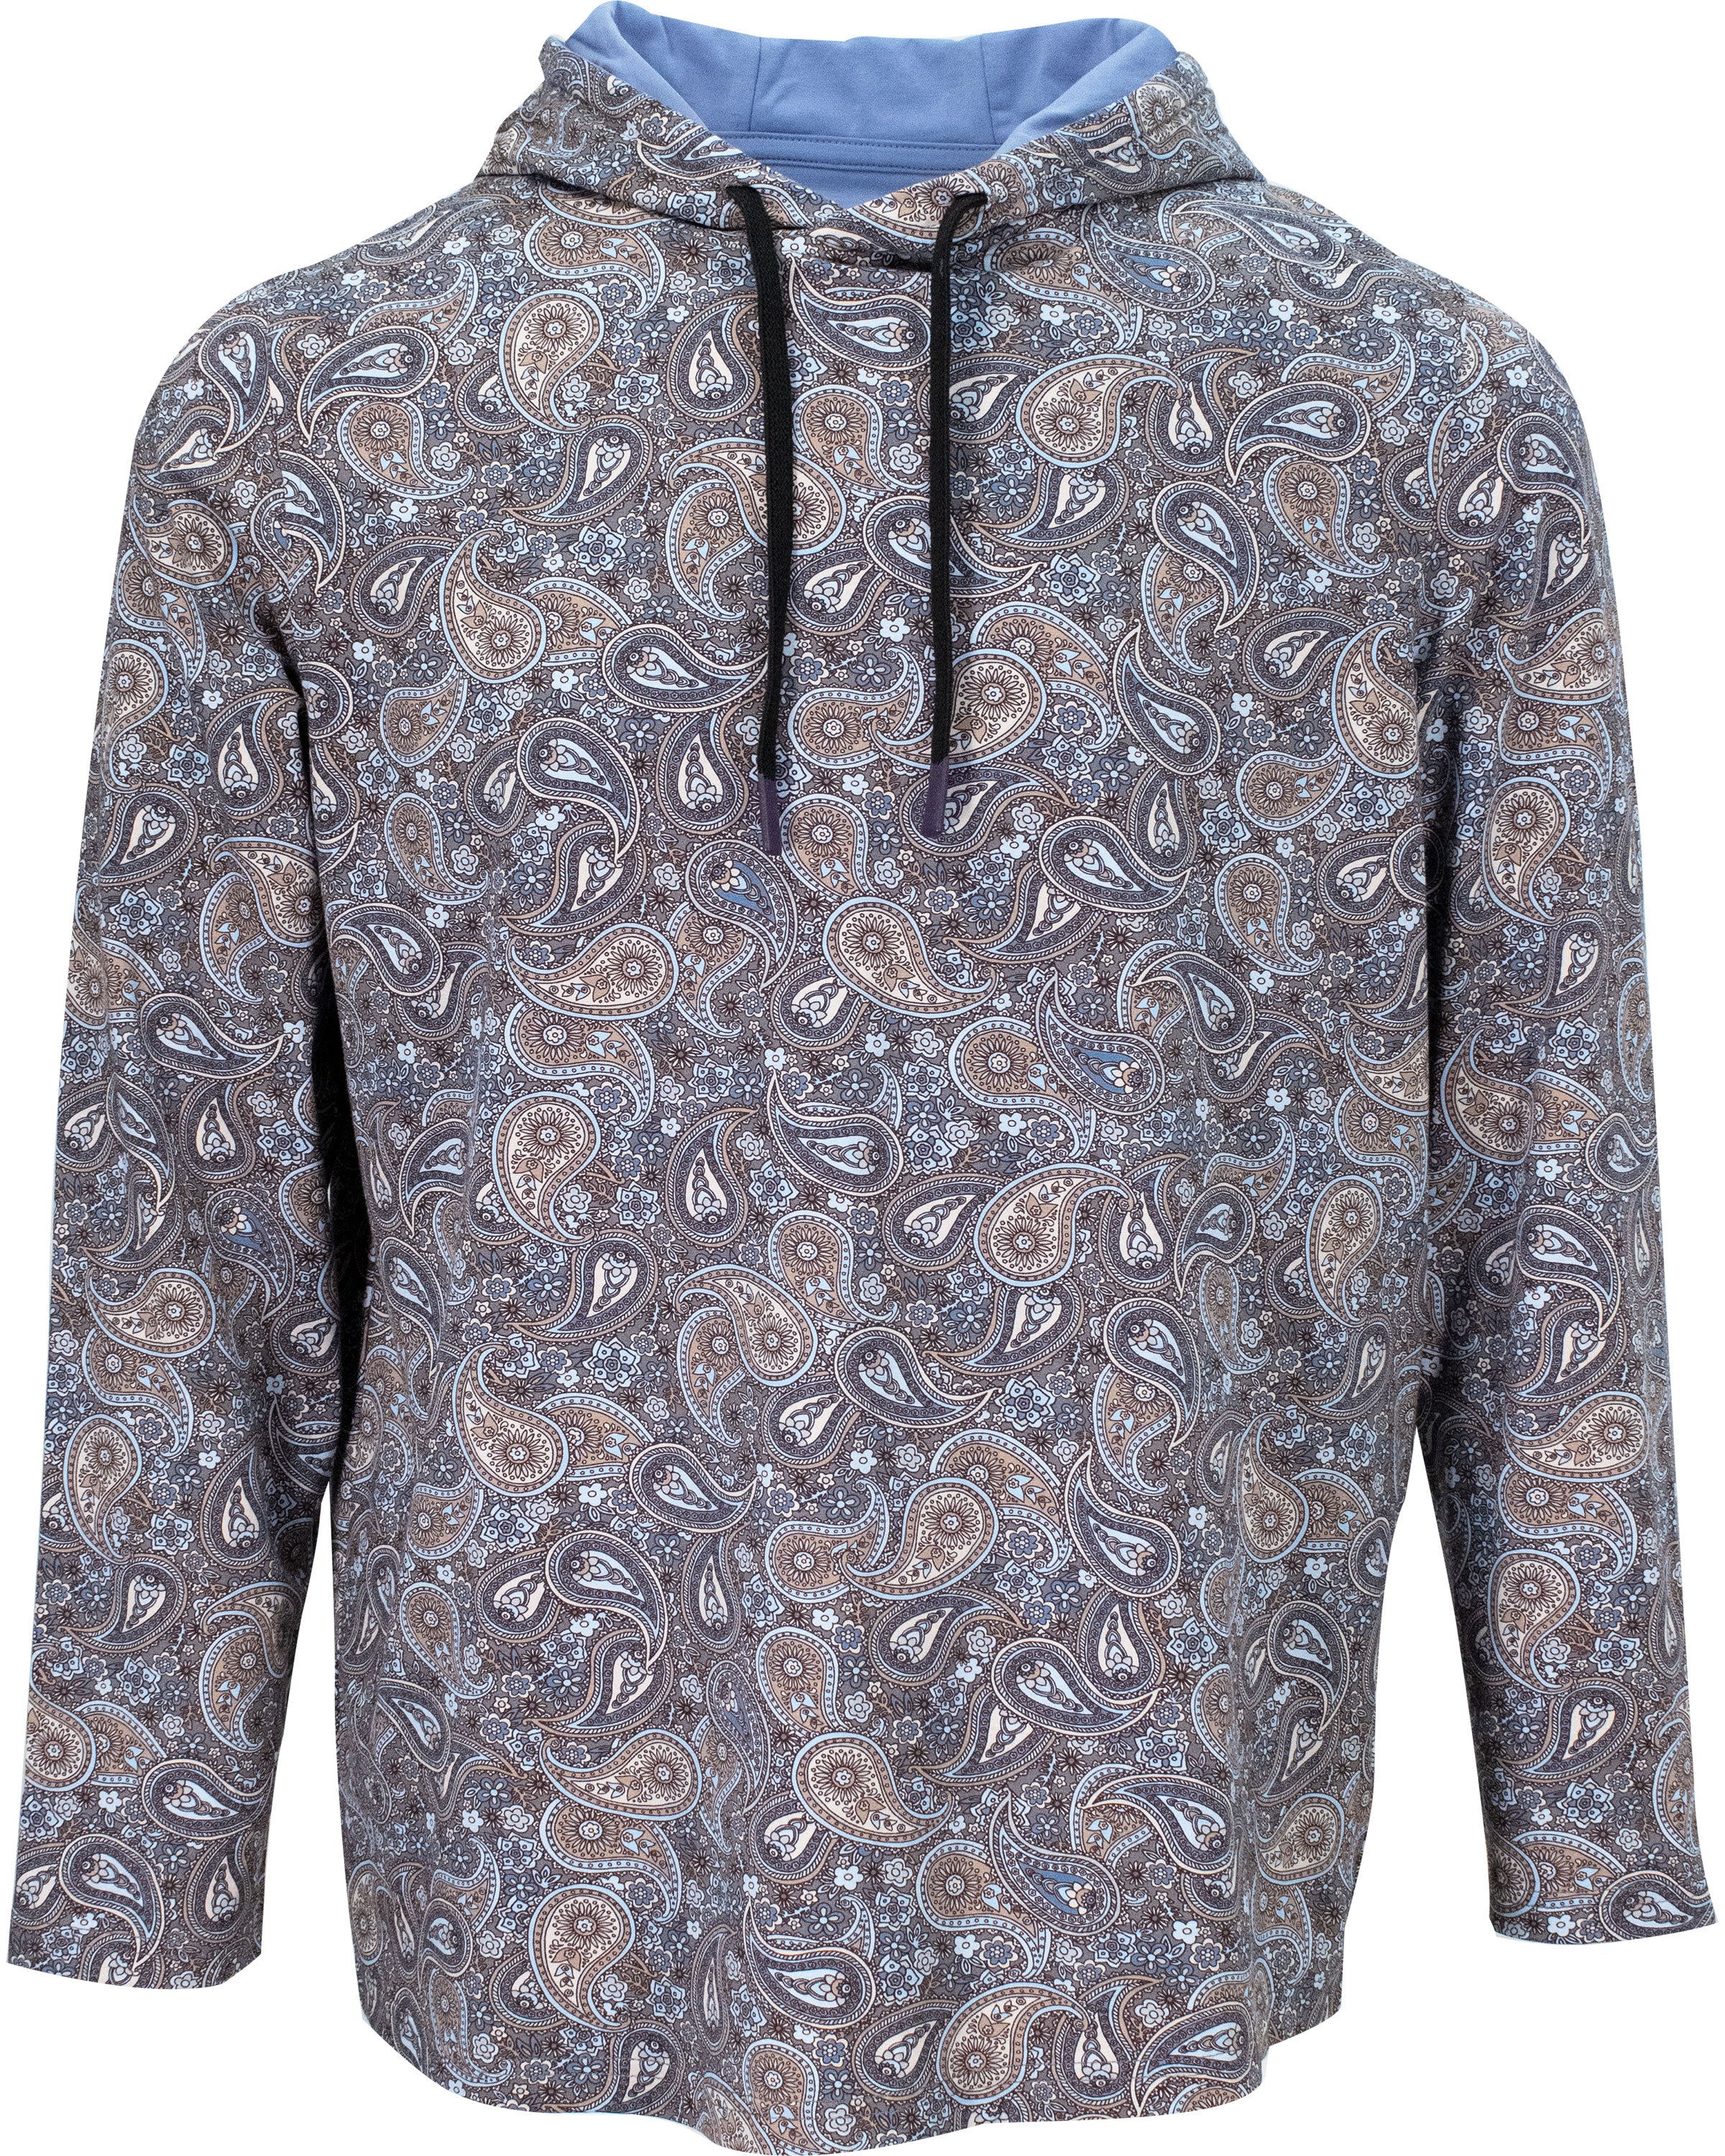 Horatio Trippy Paisley Printed Hoodie - Grey XXL Lords of Harlech